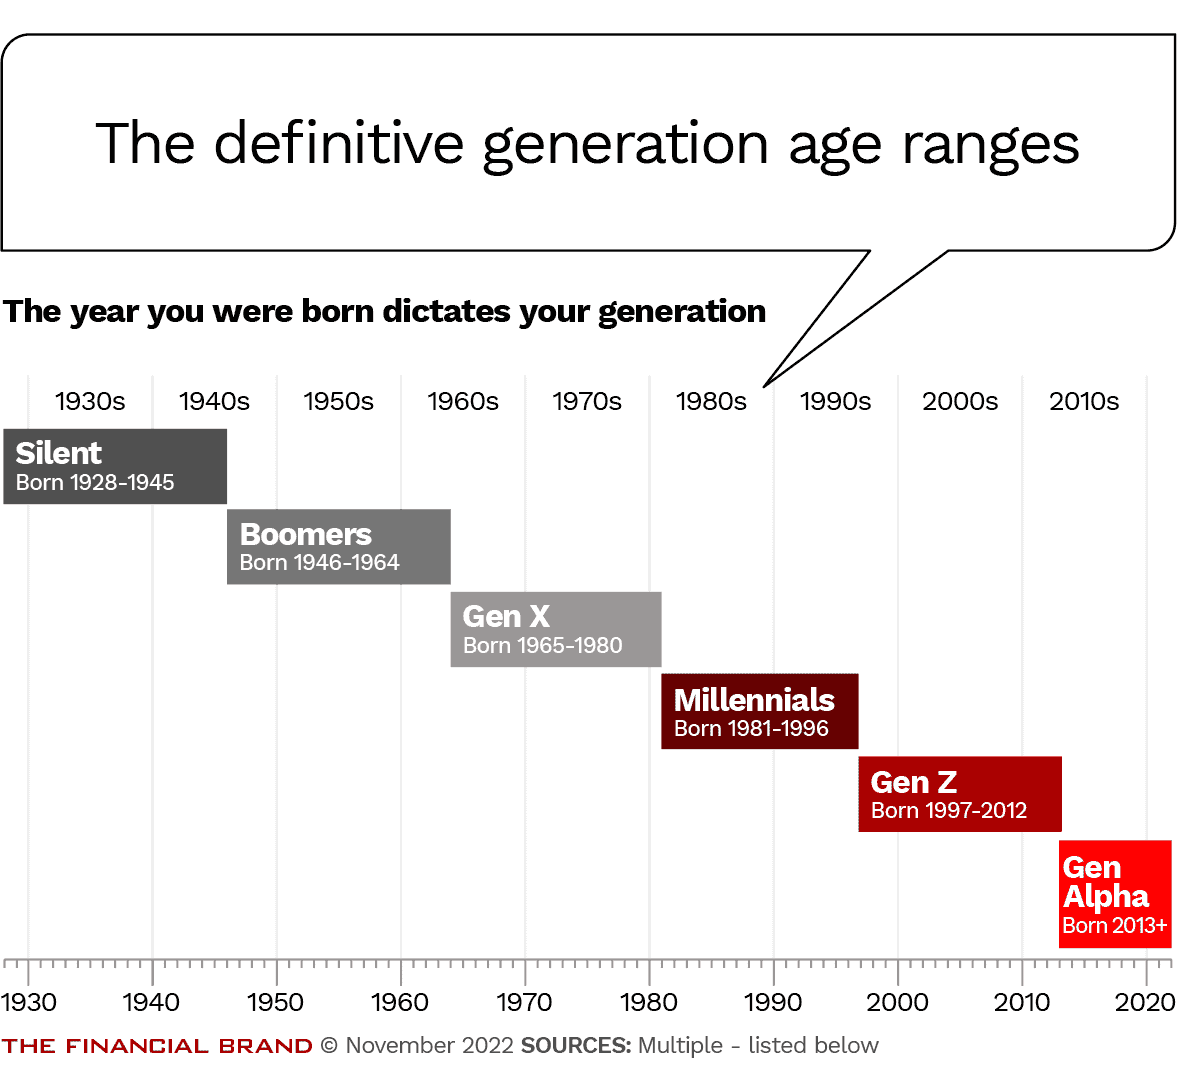 The Definitive Generation Age Ranges 